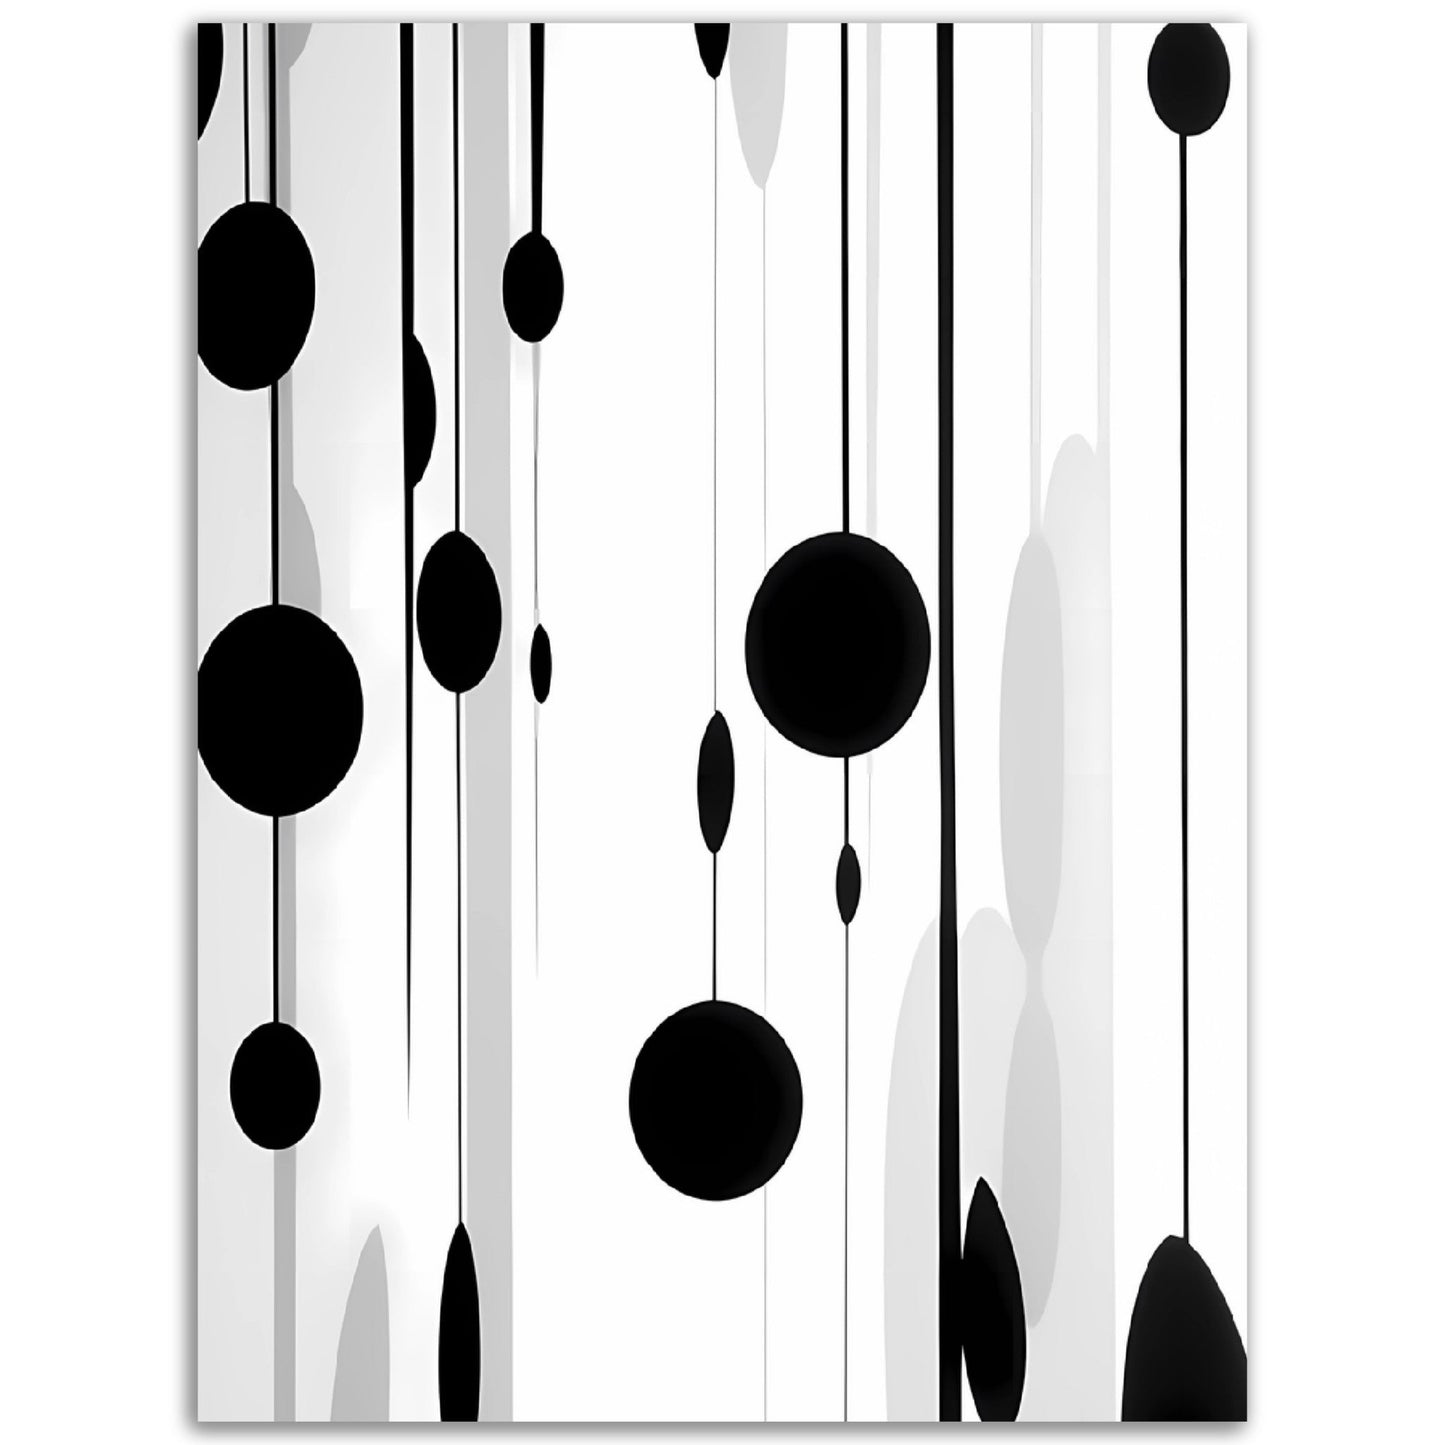 A high quality Oiled Droplets Abstract Art painting with black and white dots, perfect as wall art for rooms.